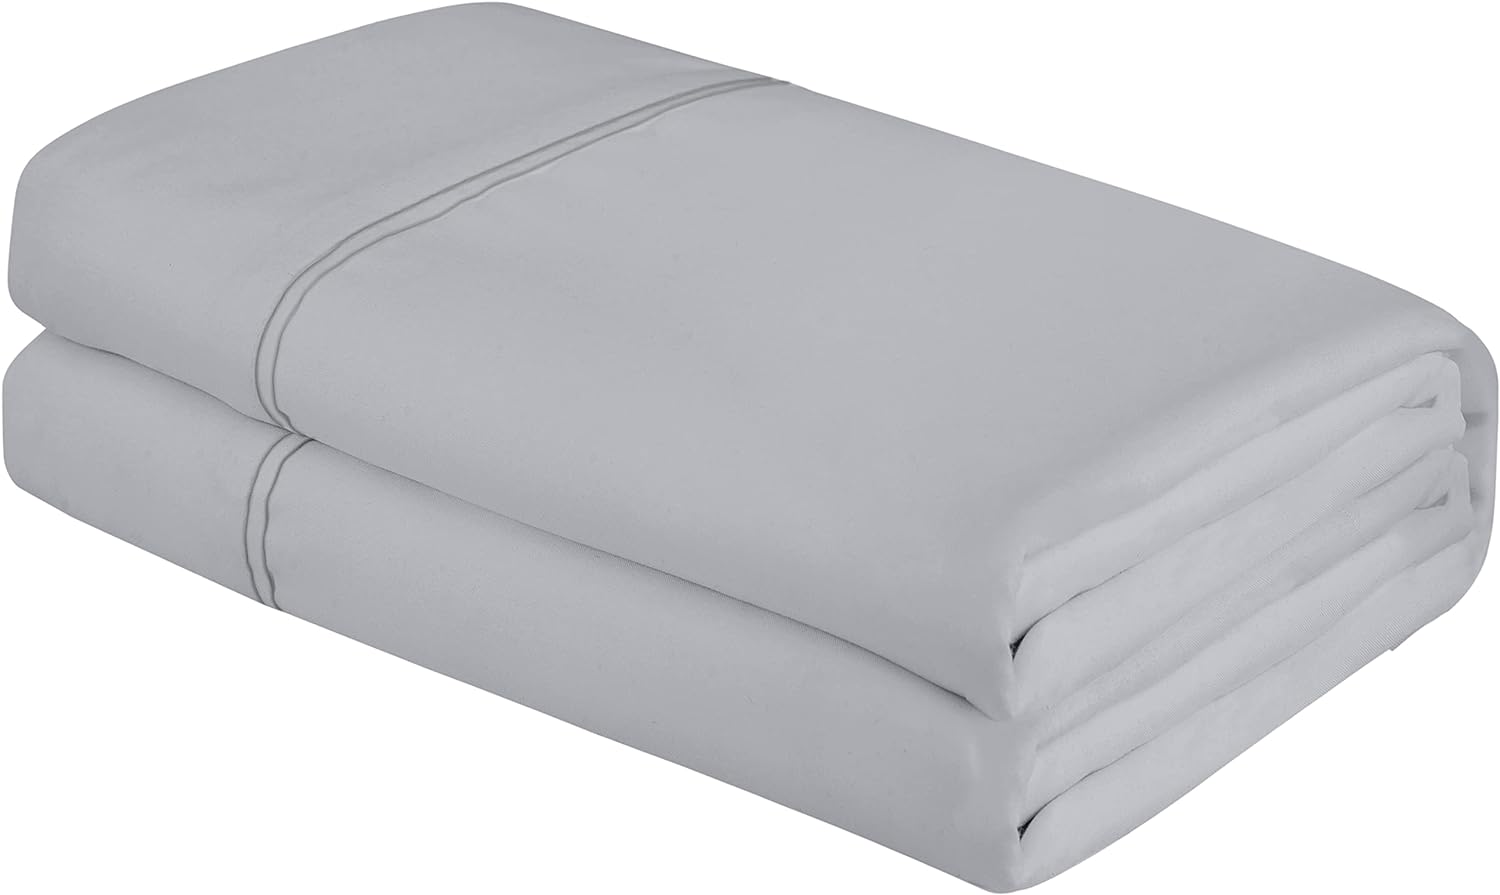 Royale Linens Queen Size Flat Sheet Only - Brushed 1800 Microfiber - Ultra Soft & Breathable - Wrinkle & Stain Resistant - Hotel Quality Flat Sheet Sold Separately - Top Sheet for Bed (Queen, Silver)